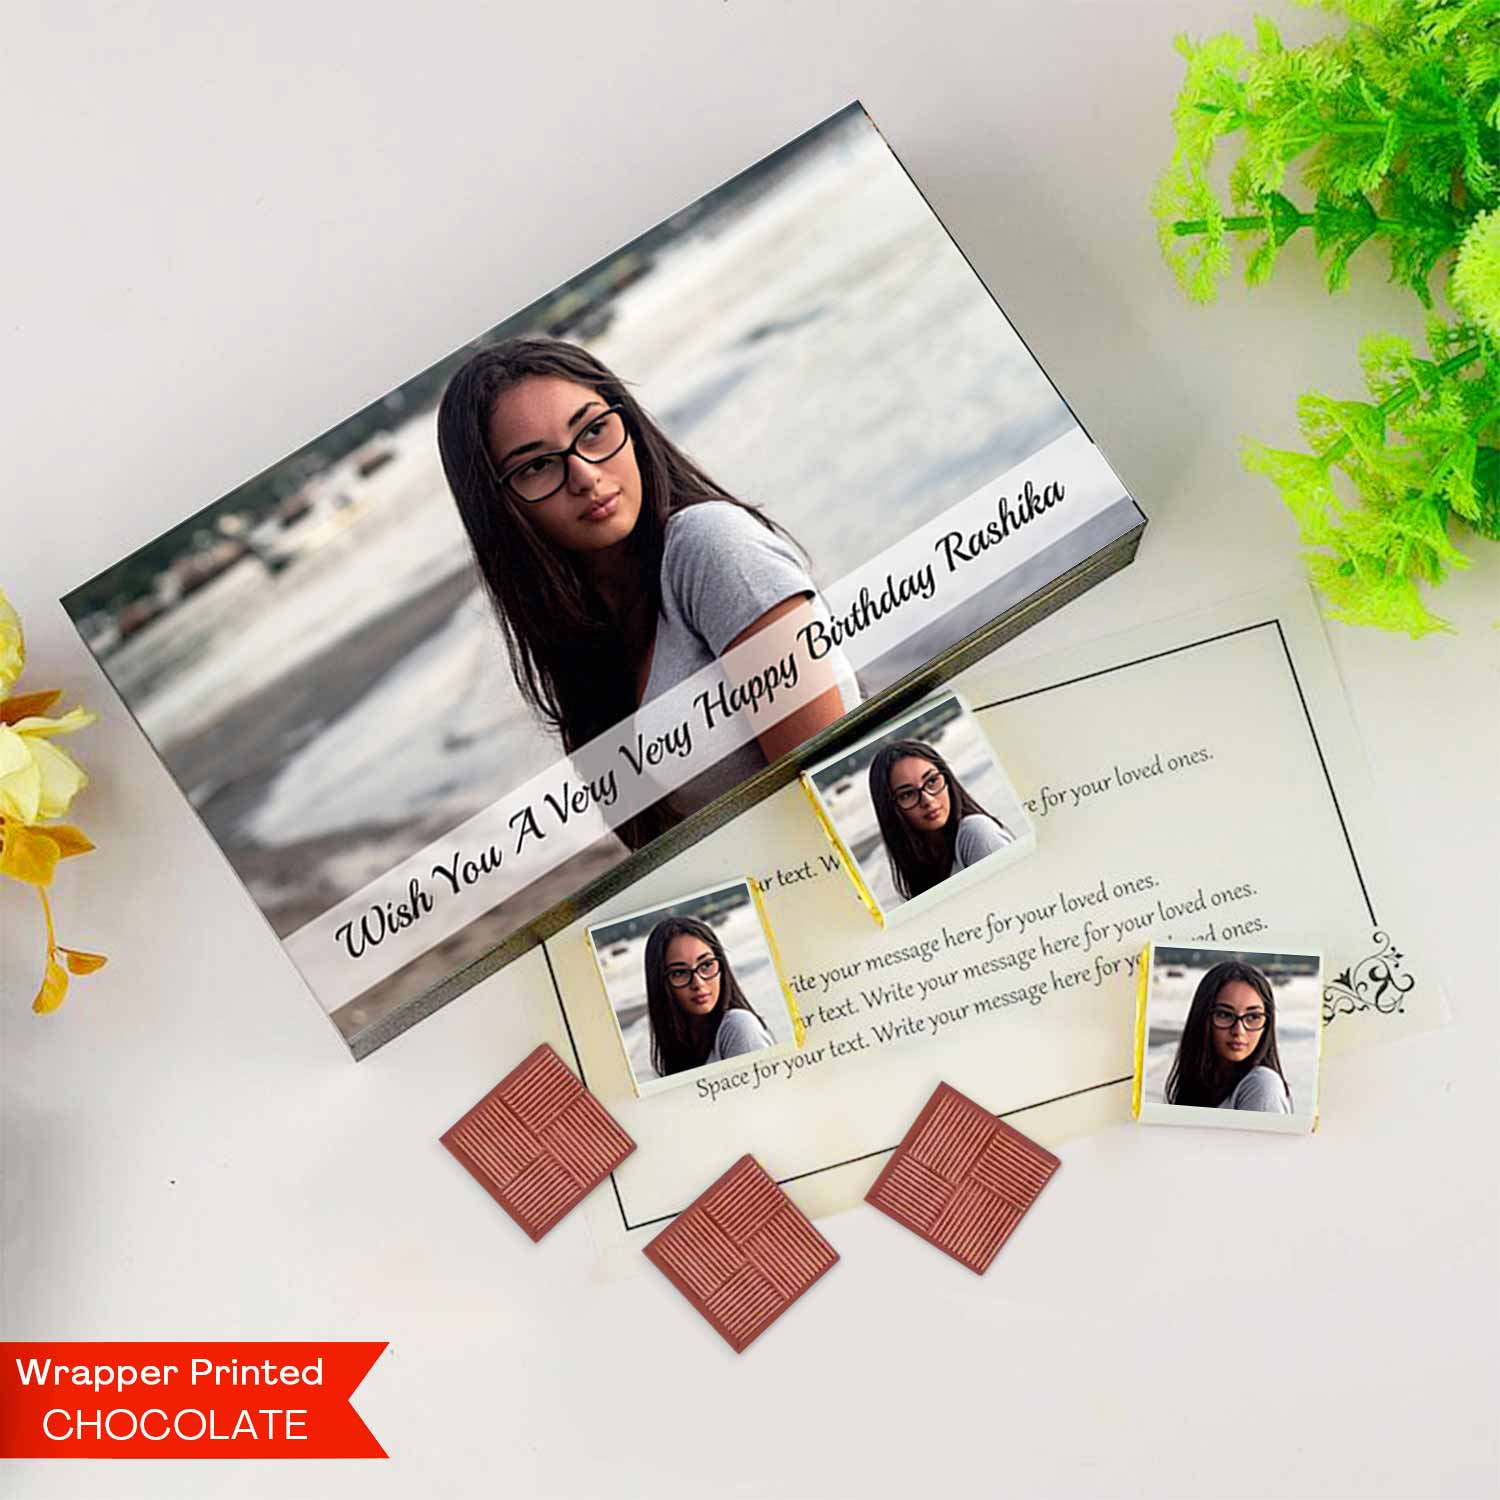  photo printed chocolate personalised chocolates with names photo on chocolate wrappers customised chocolate wrapper personalised chocolates with photo india personalised chocolate gift box personalised chocolates for birthdays customised chocolate gifts